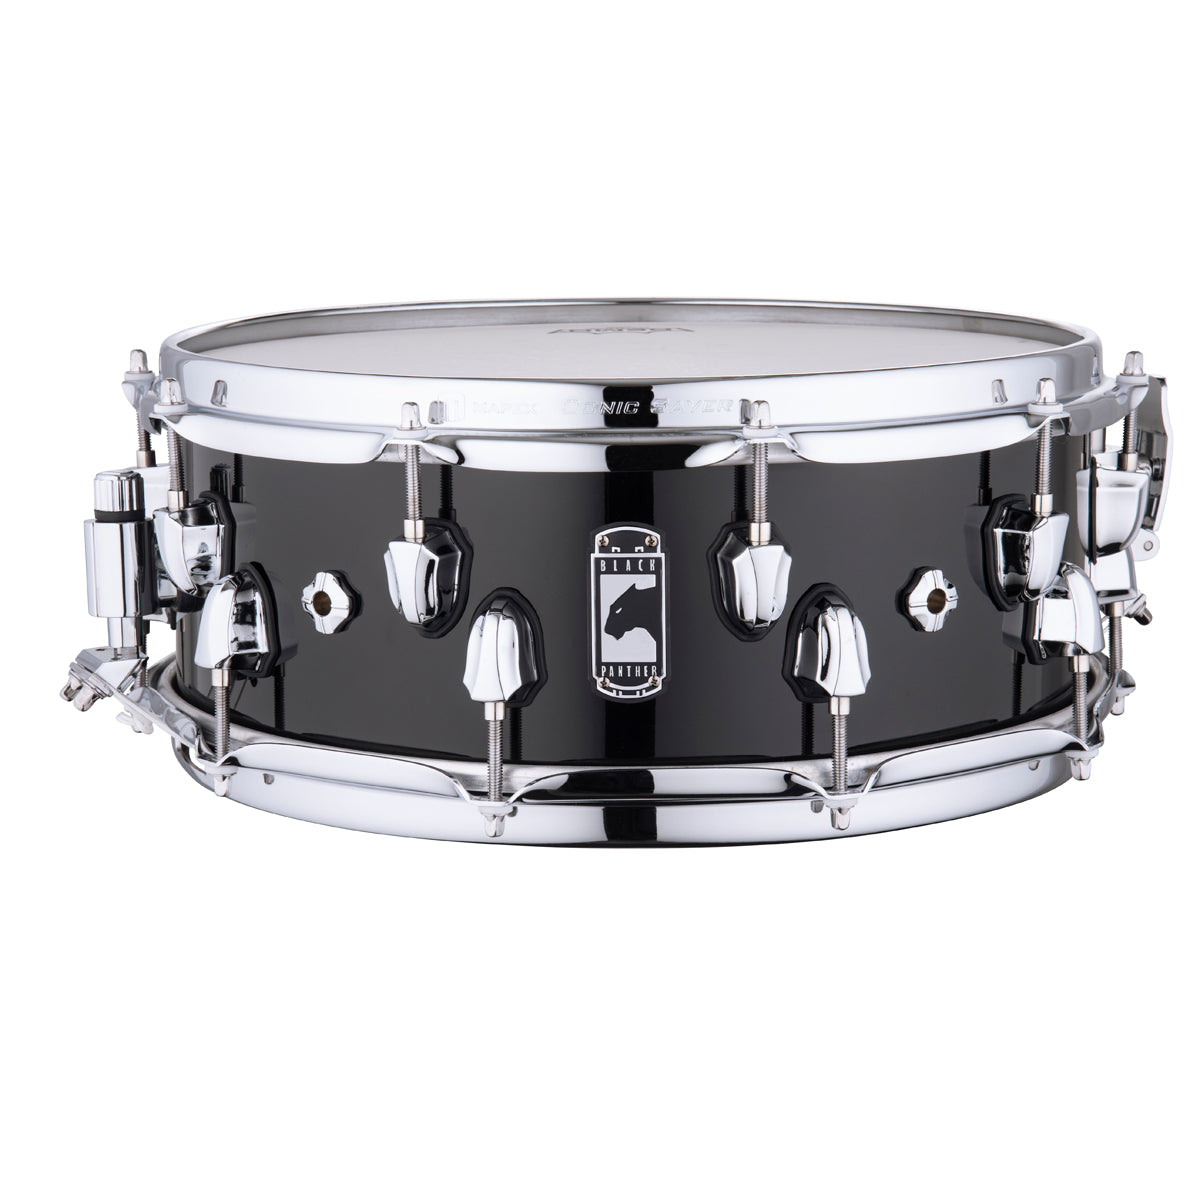 Mapex Black Panther 14" x 5.5" 'Nucleus' Maple/Walnut Snare